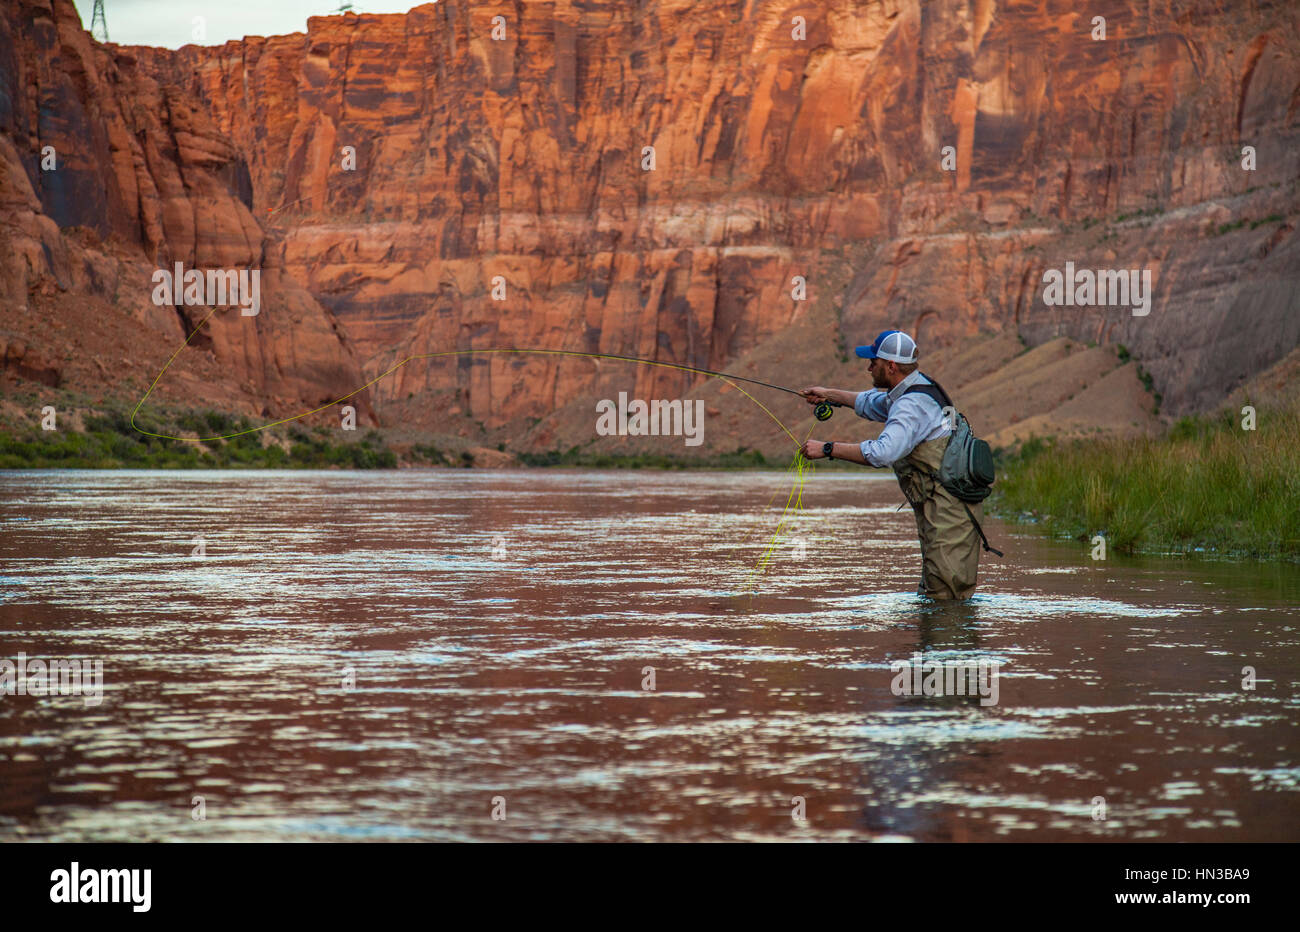 Man Fly Fishing On The Colorado River In The Grand Canyon Stock Photo -  Alamy